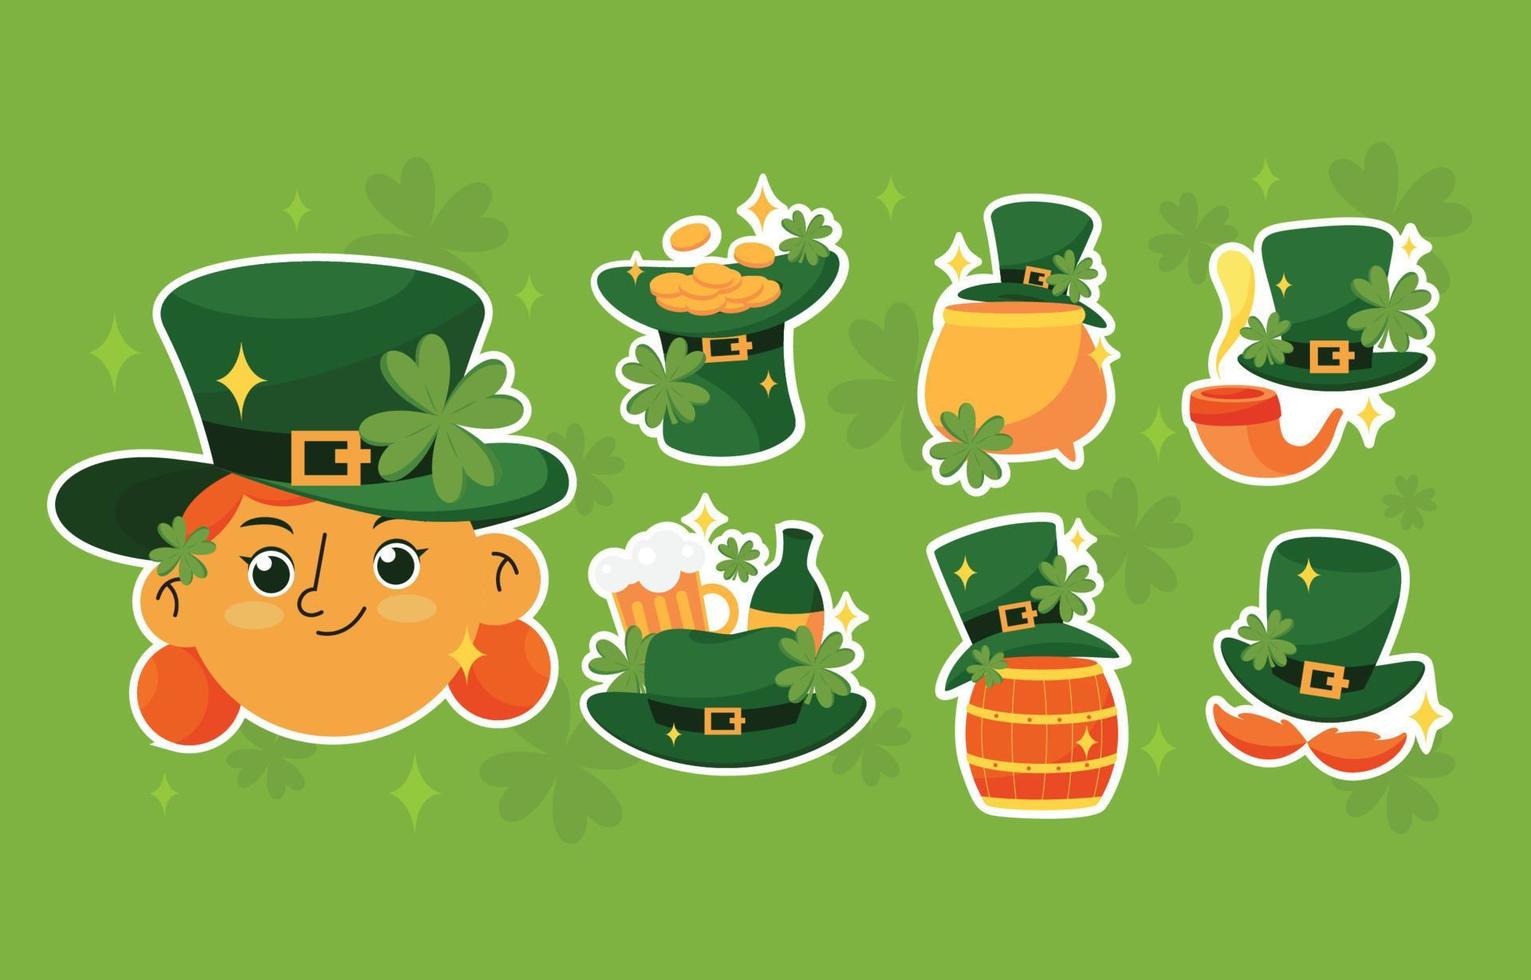 st. patrick's day hoed sticker collectie vector